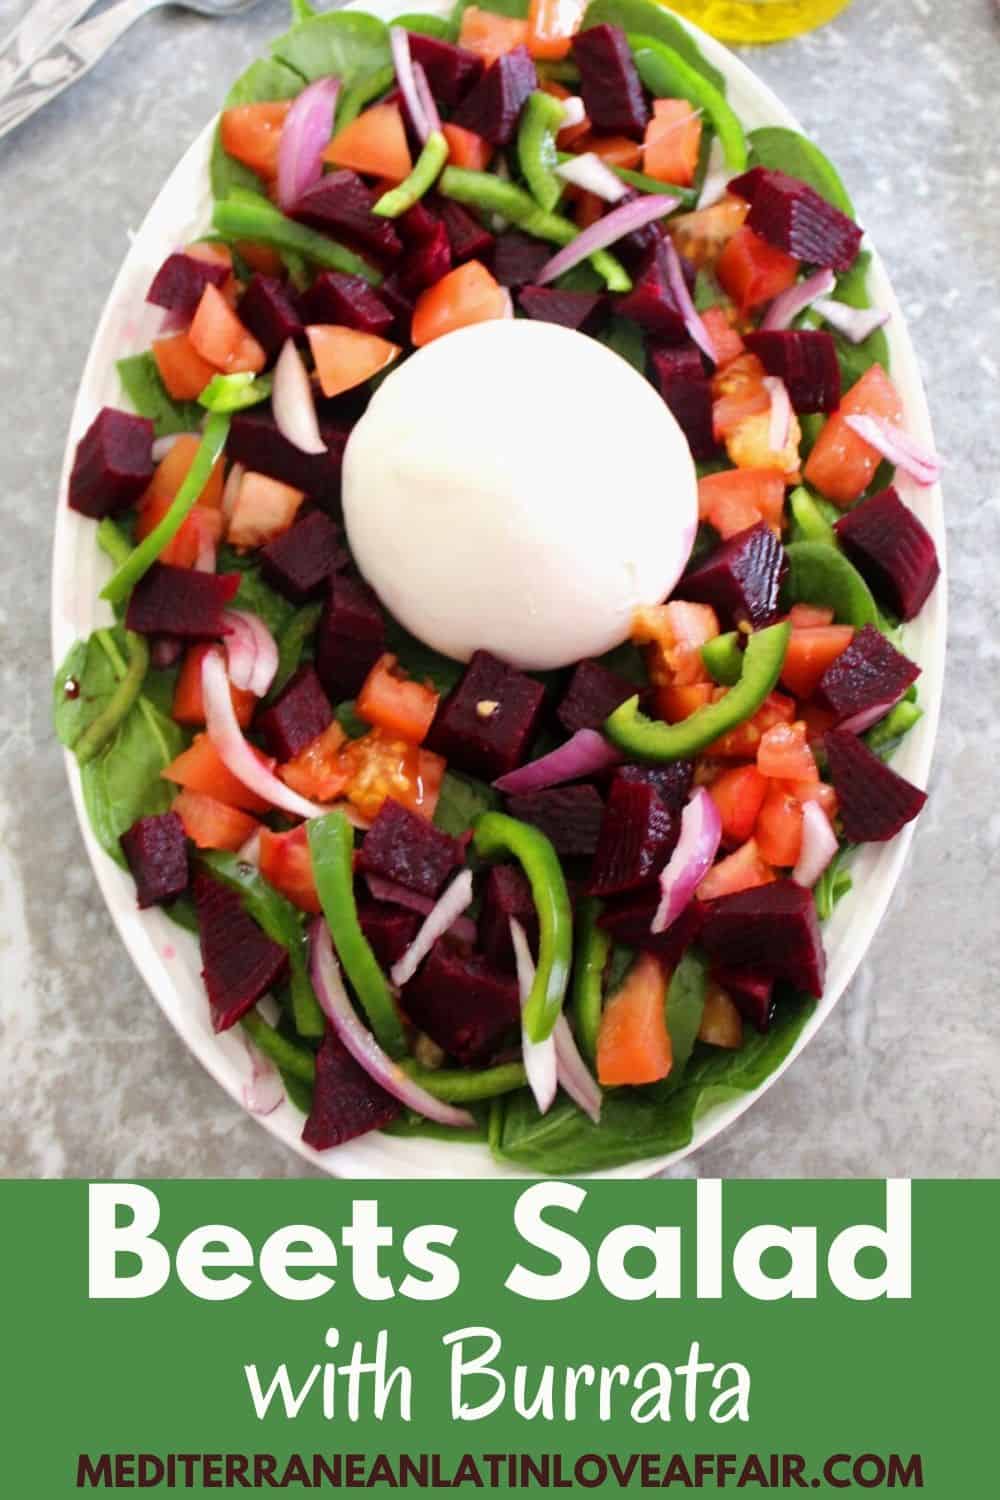 Beets Salad with Burrata on a platter. Image is accompanied by a large title banner.